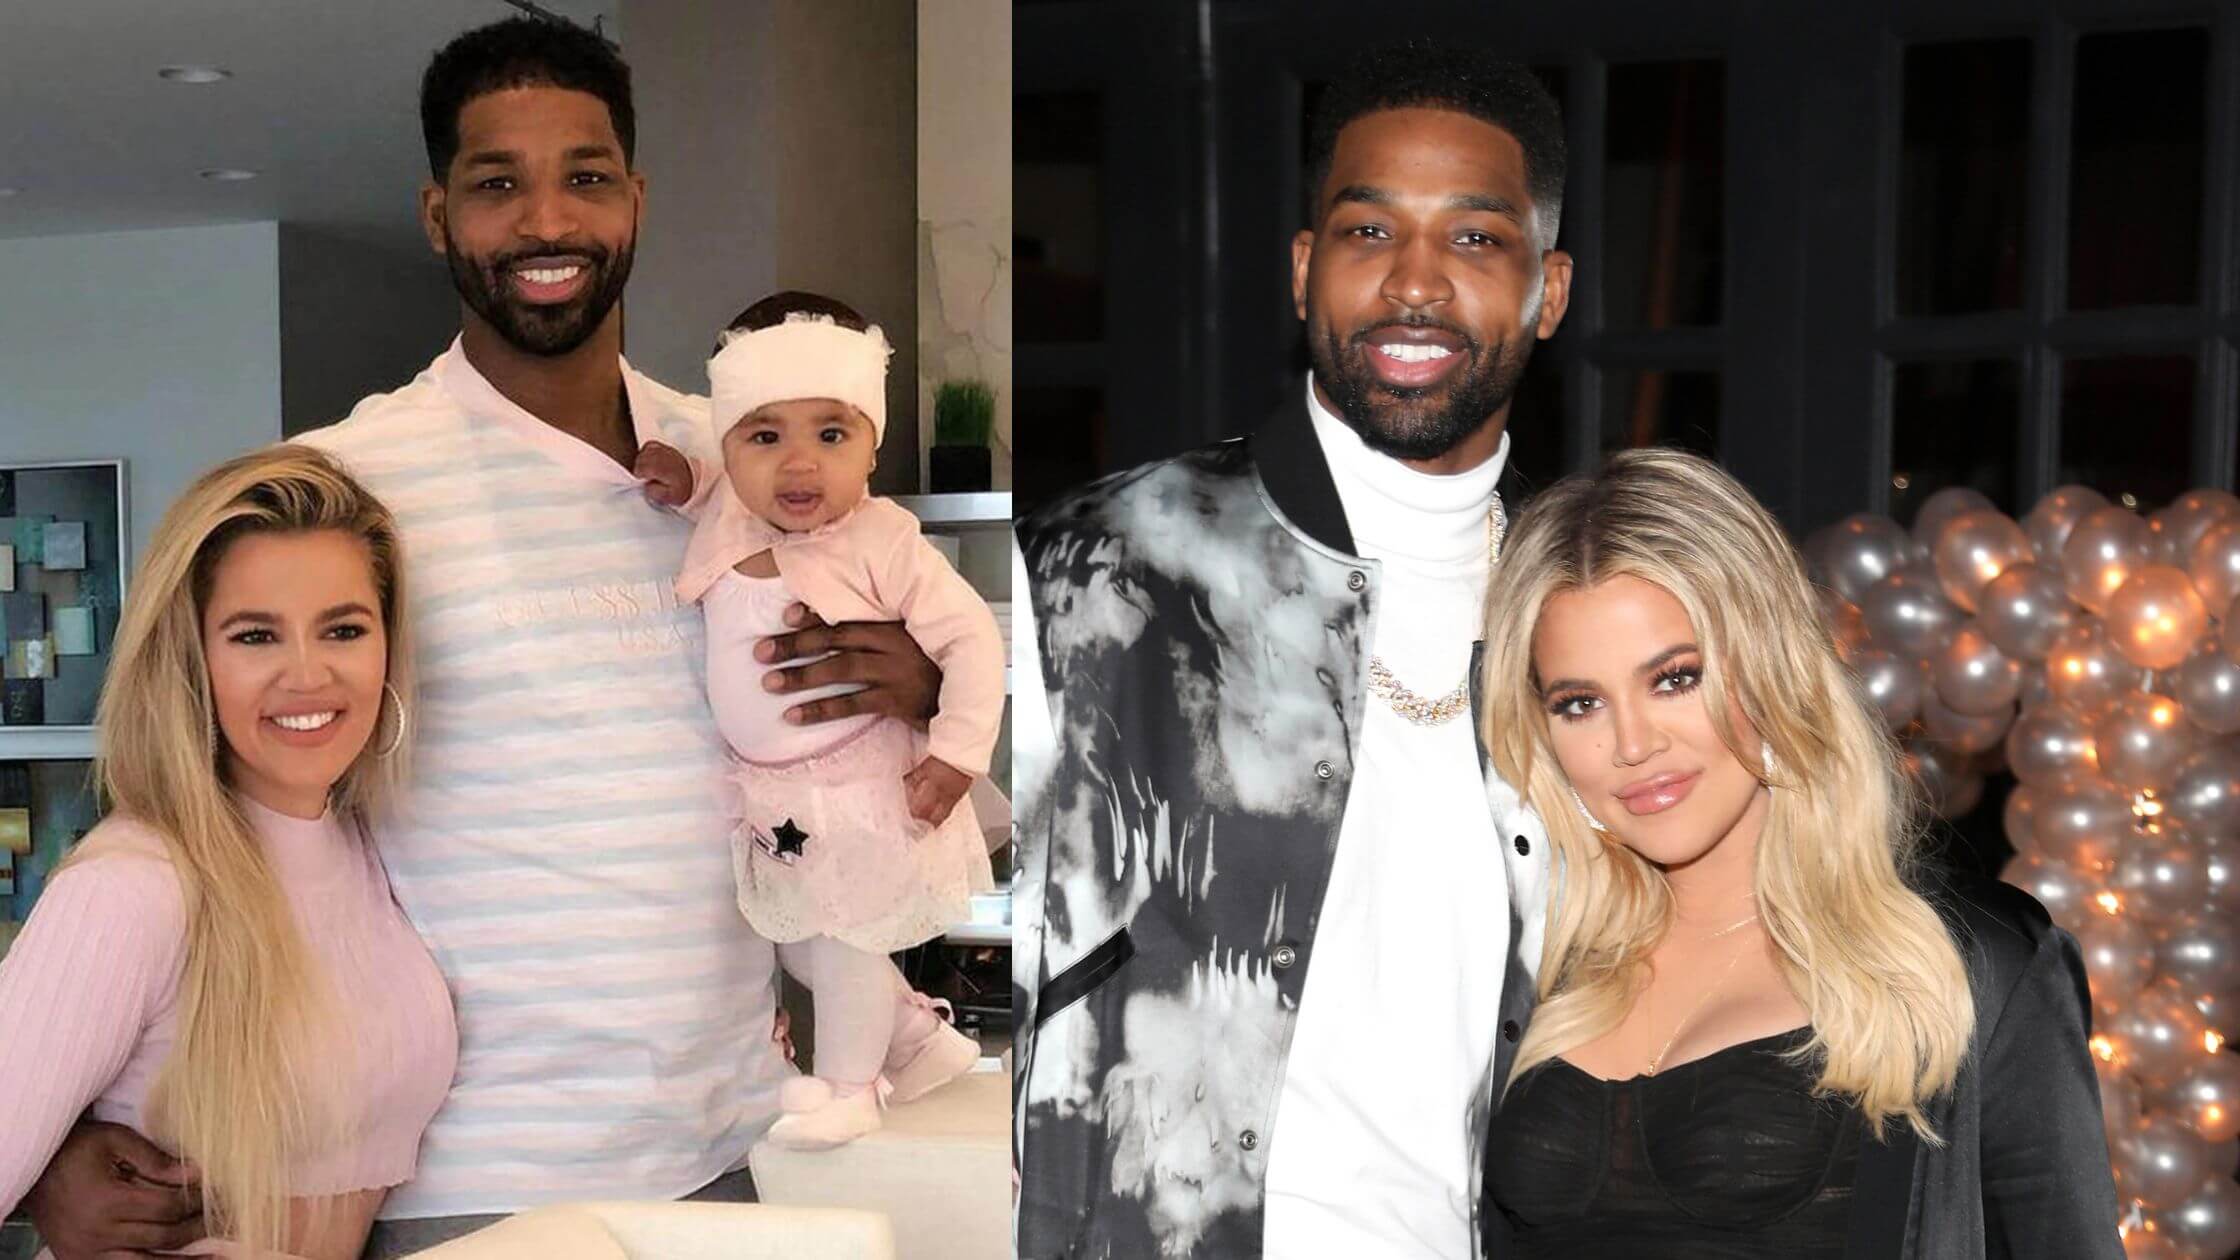 Khloé Kardashian And Tristan Thompson's 'Baby Was Conceived' Before His Cheating Surfaced: Source